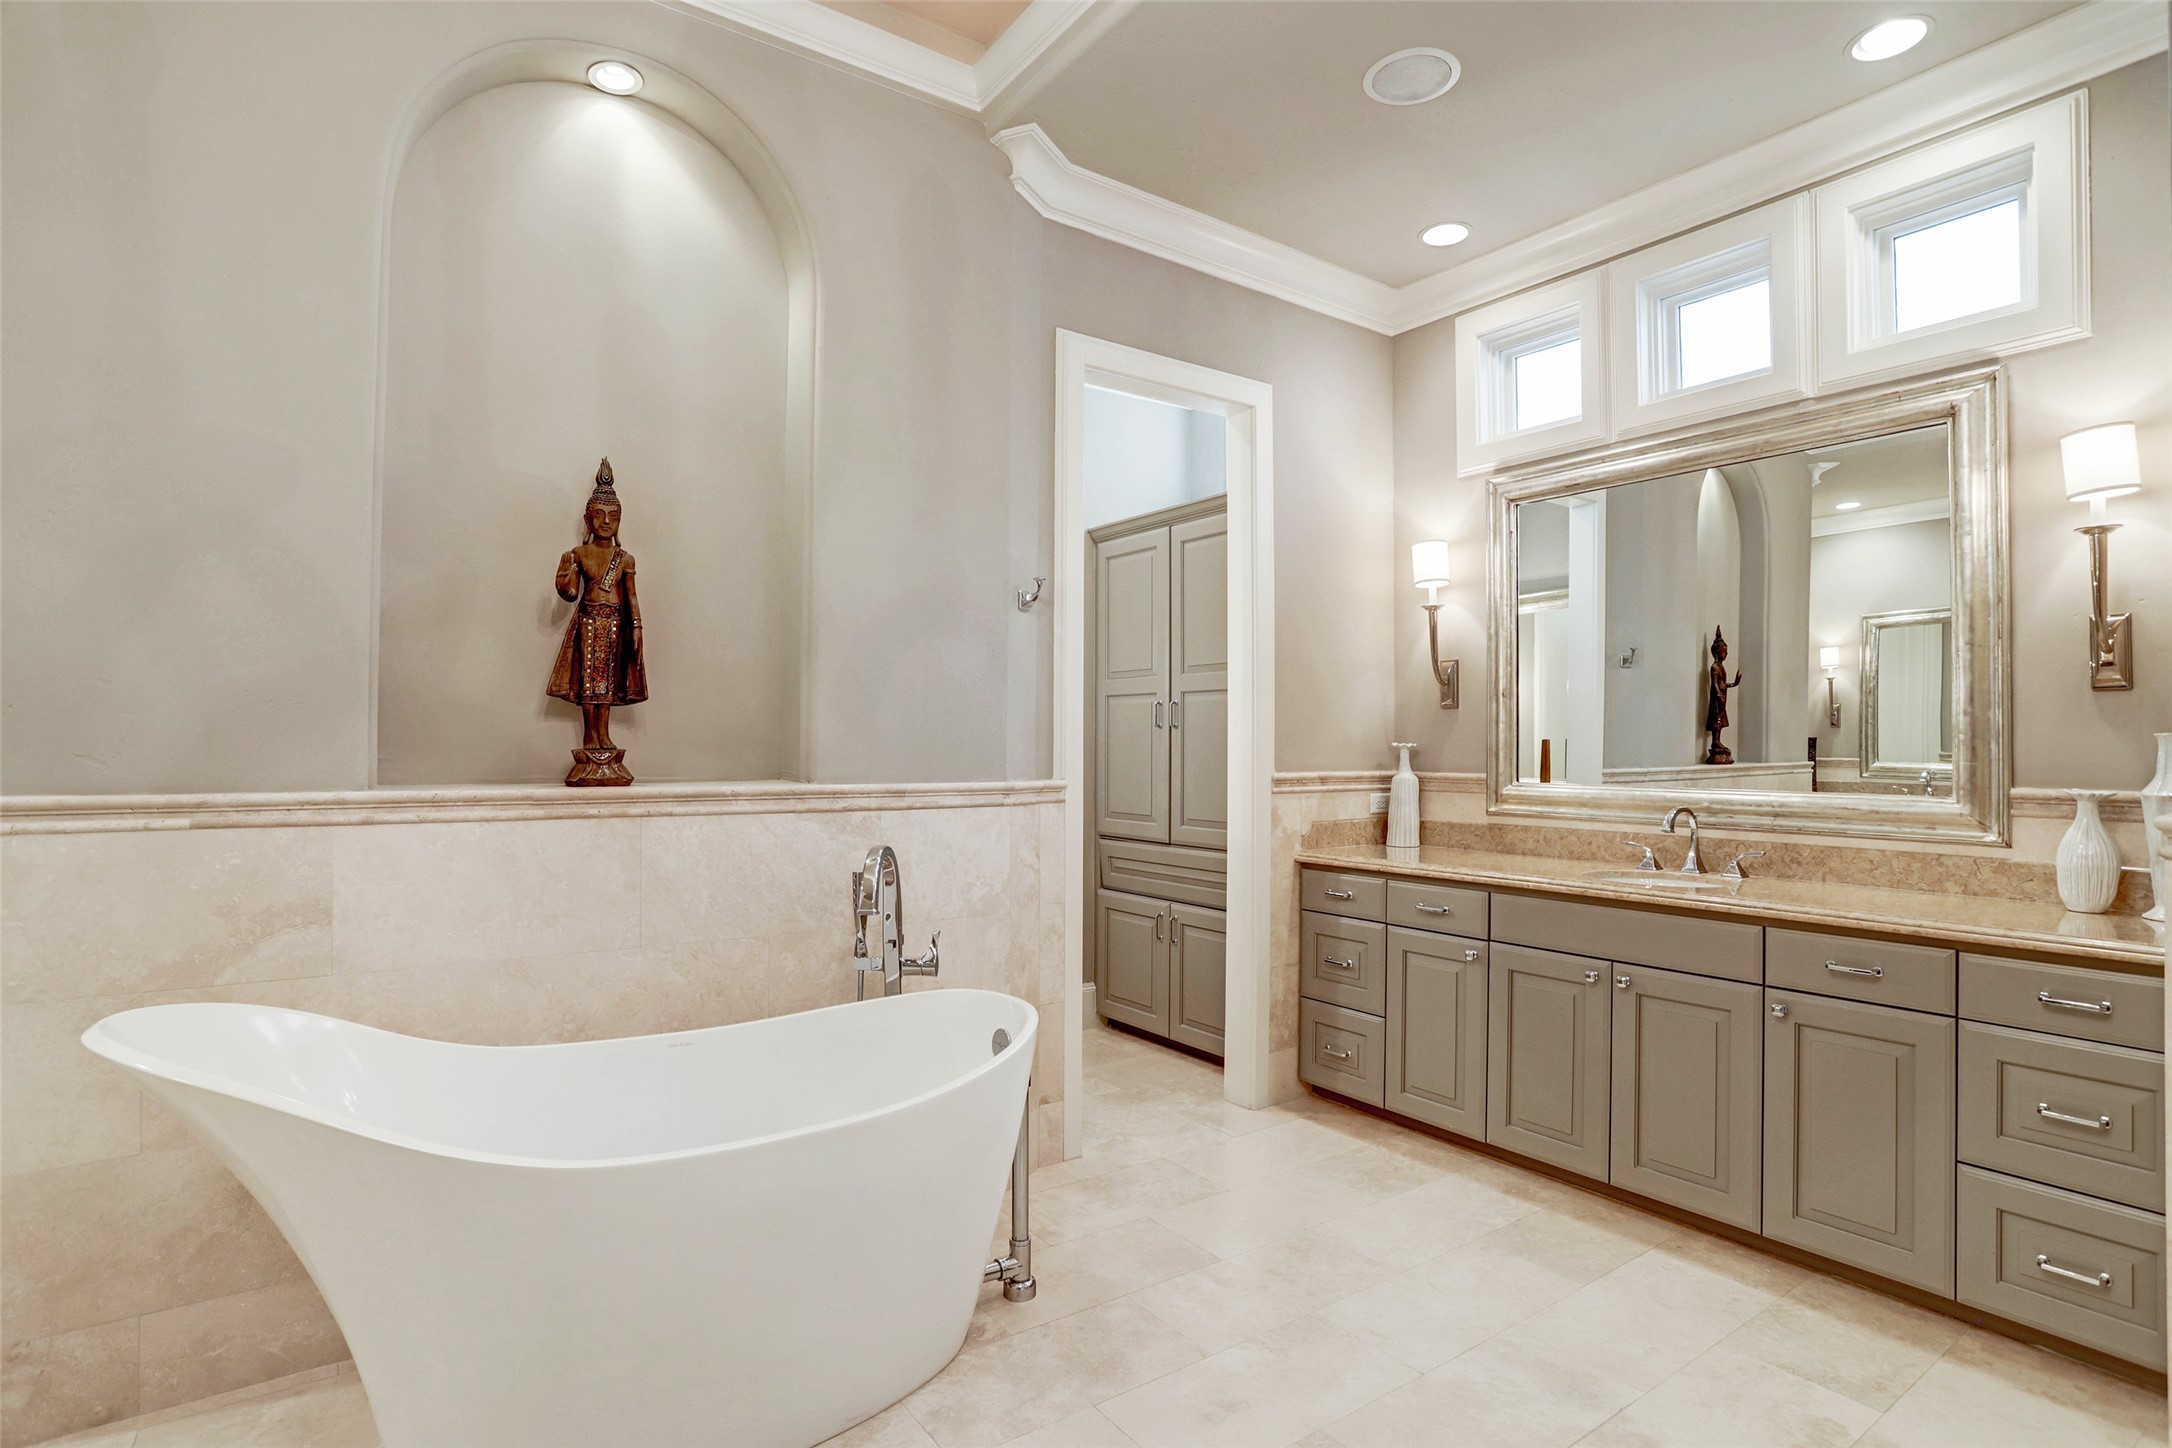 Luxurious Owners' bath with shower and soaking tub